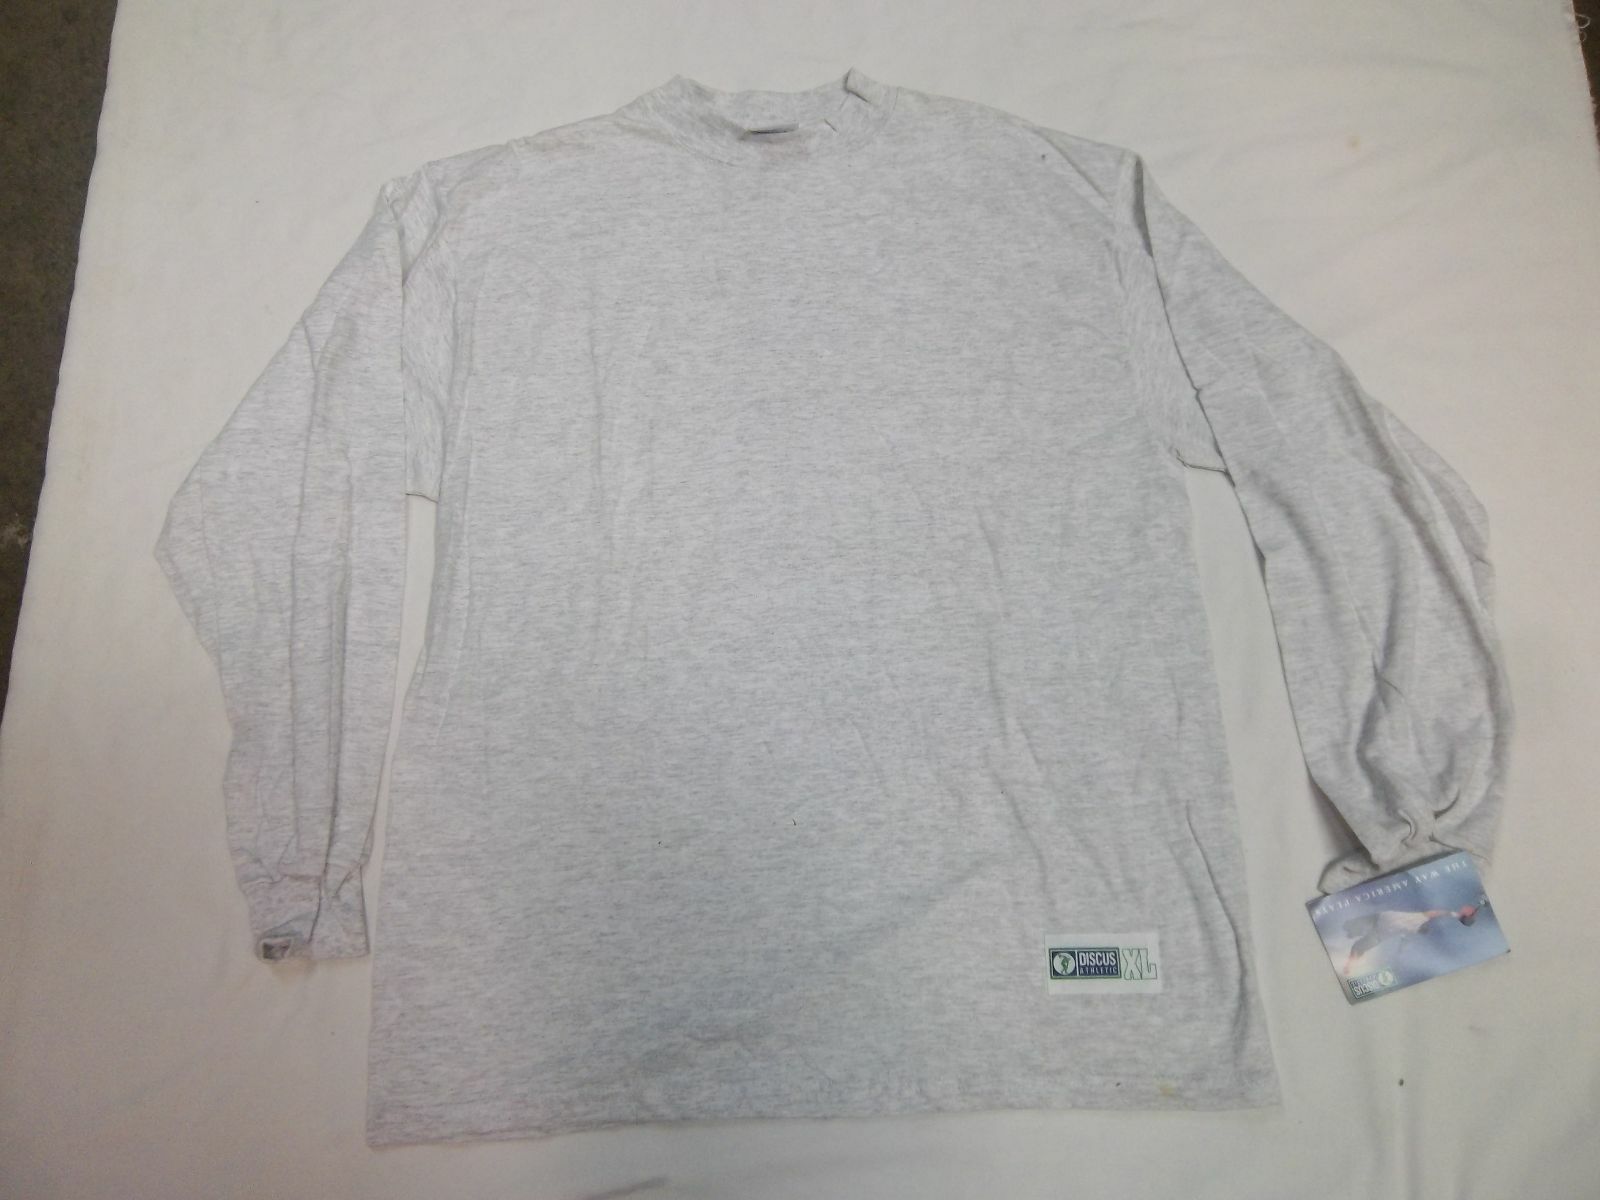 DISCUS TURTLE NECK LONG SLEEVE SHIRT (VARIOUS SIZES AND COLORS)